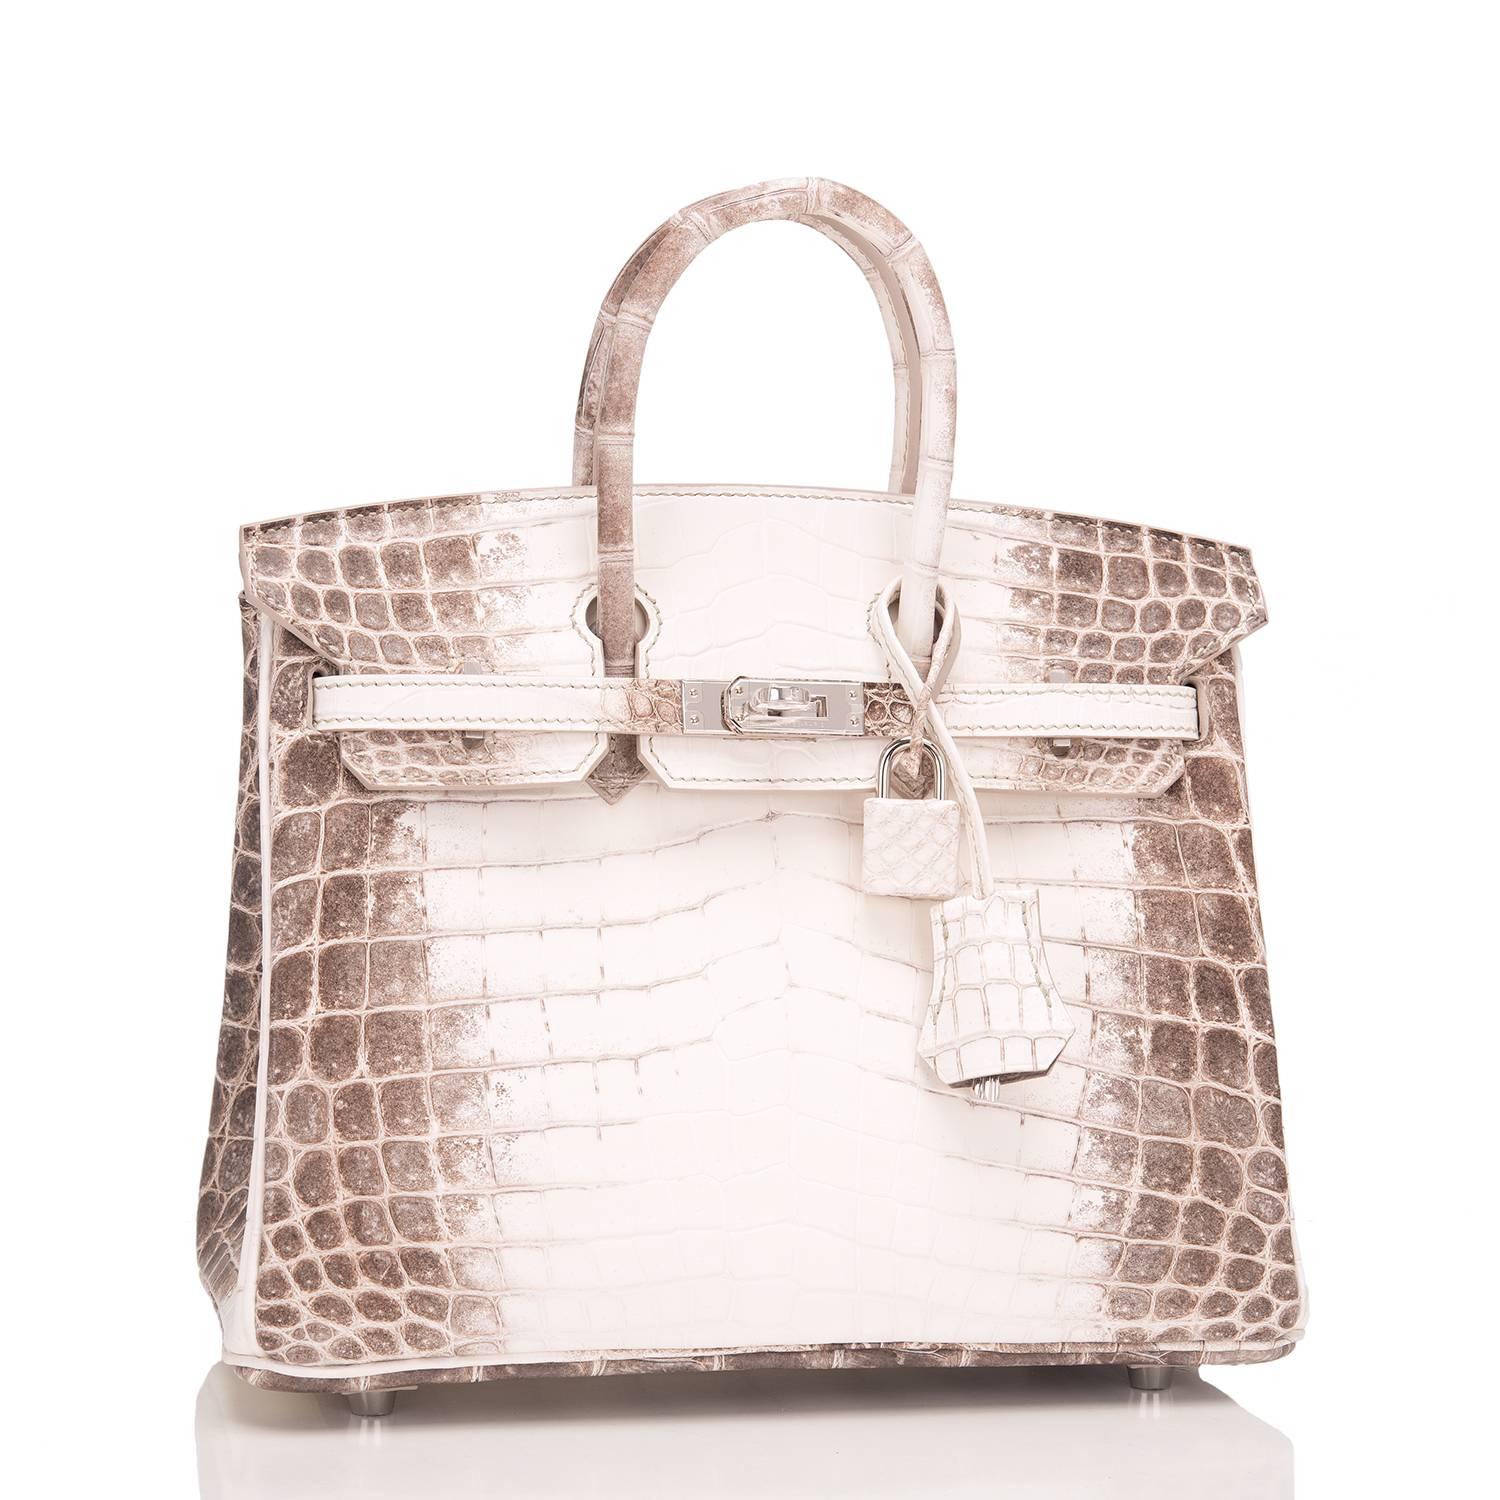 Hermes Himalayan 25cm Birkin of white matte niloticus crocodile skin with palladium hardware.

This rare Himalayan, dyed to resemble the Himalayan mountains, features tonal stitching, a front toggle closure, a clochette with lock and two keys, and